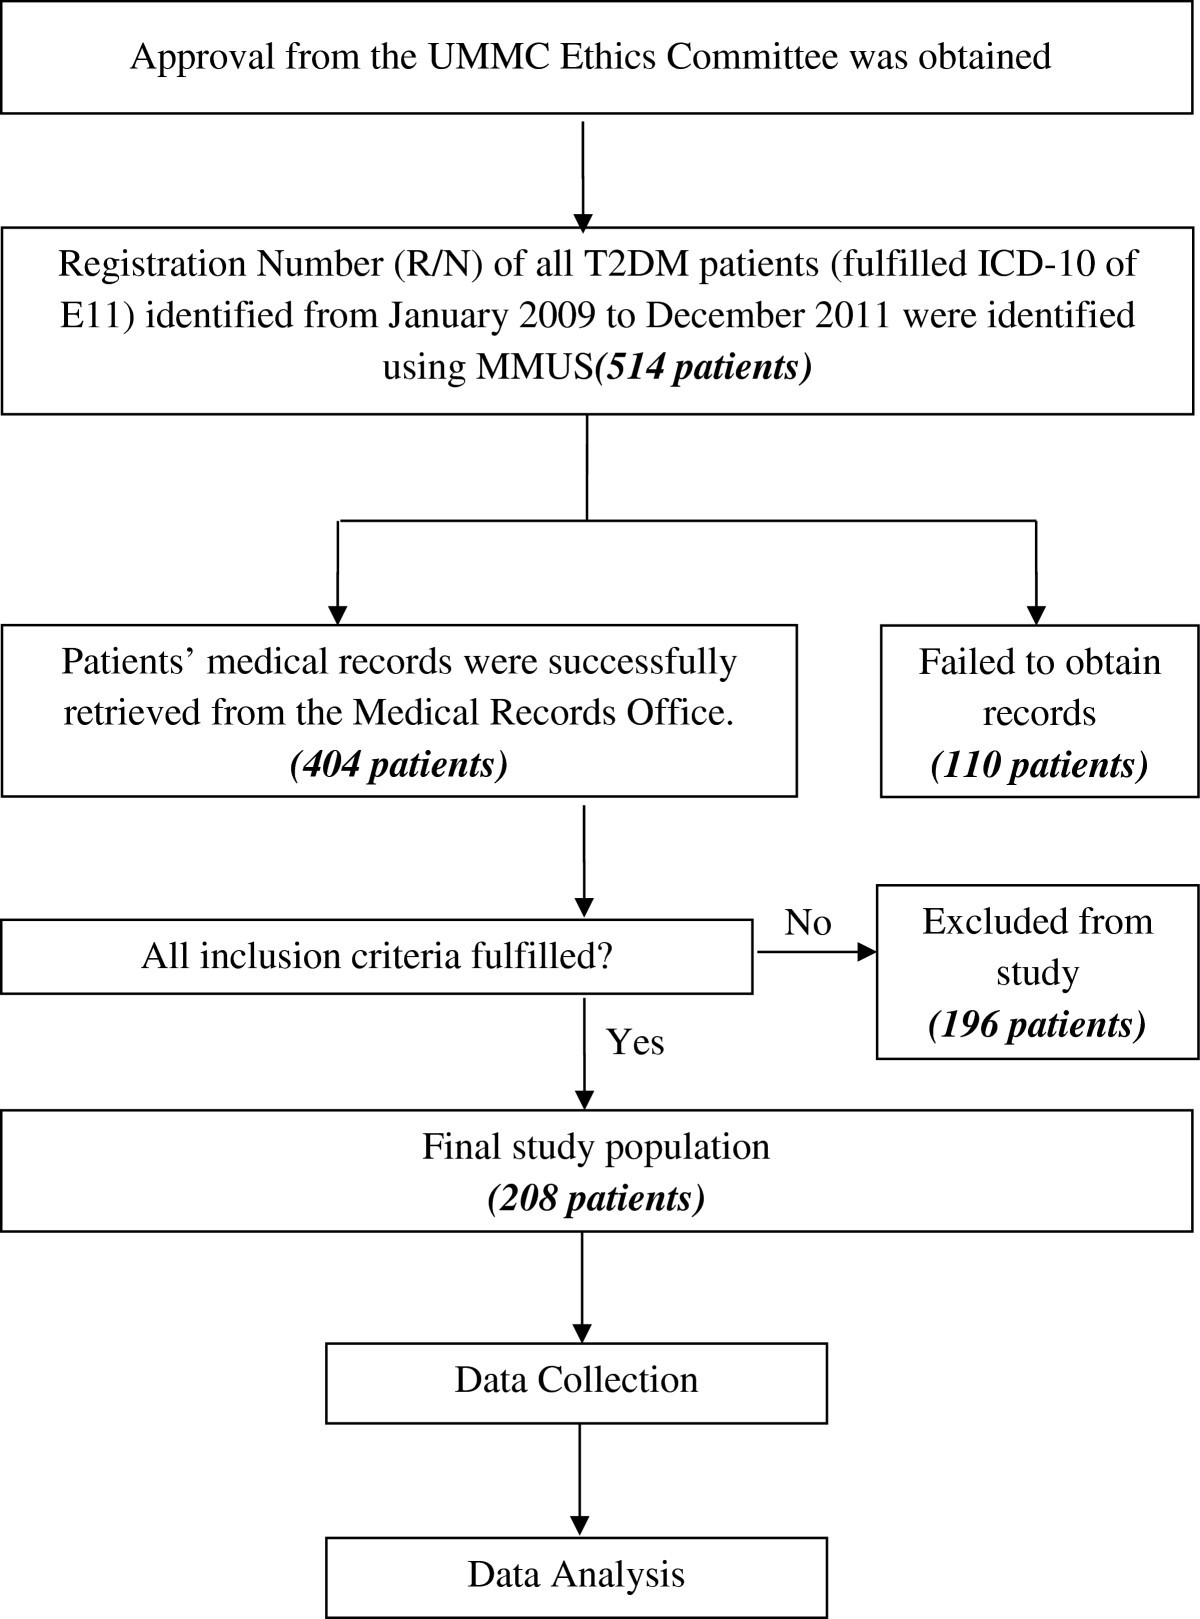 Drug-related problems in type 2 diabetes mellitus patients with